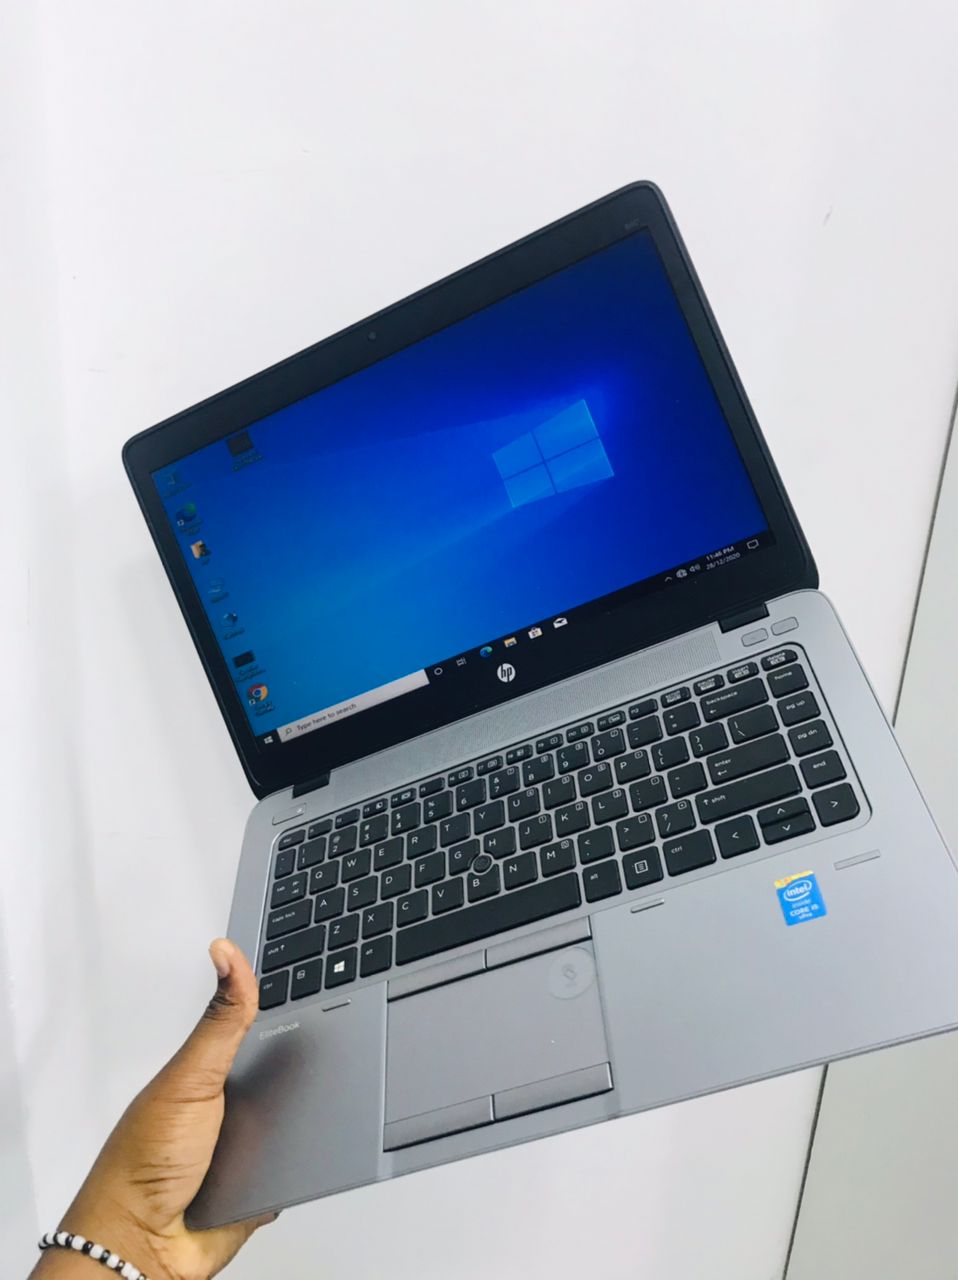  Hp Elitebook 840 G2 (5Th Generation) Intel Core I5 Ram 4Gb Hdd 500Gb  Screen Size 14.0"  4 Hrs Charge Clean Like New ✅✅2.70Ghz Grade A+Free Window Na Programs